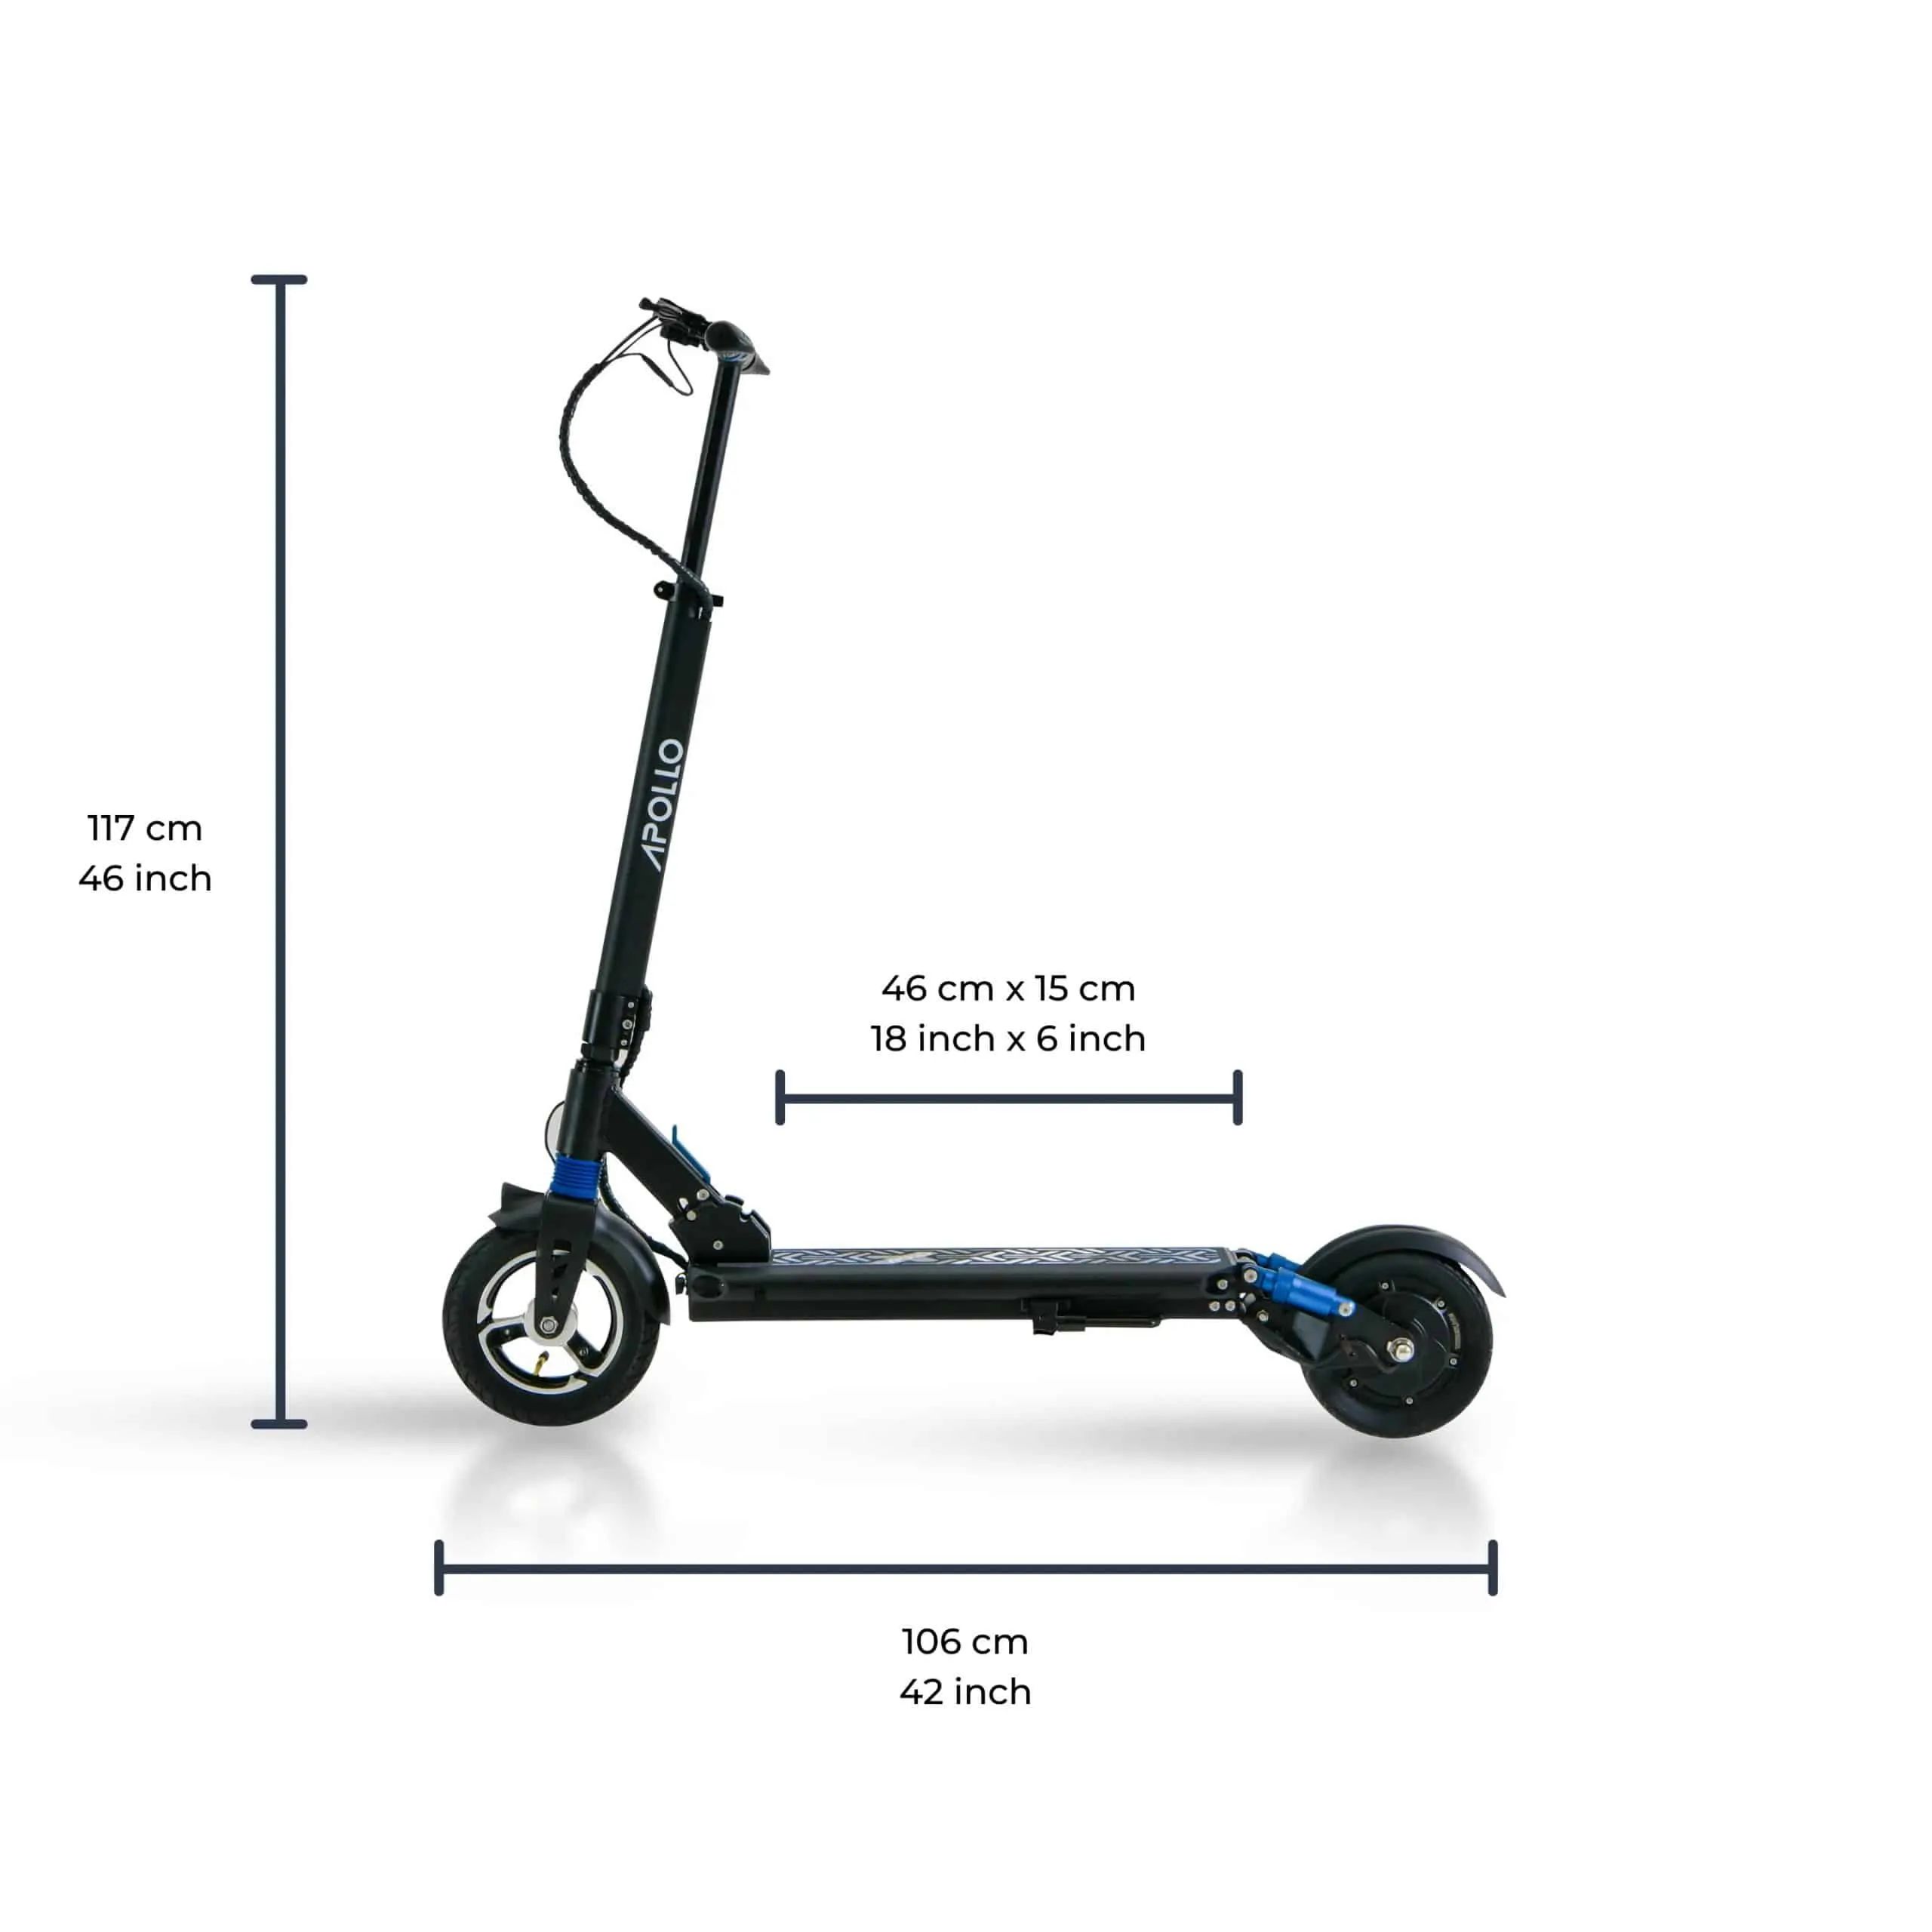 Apollo Light Scooter Specifications